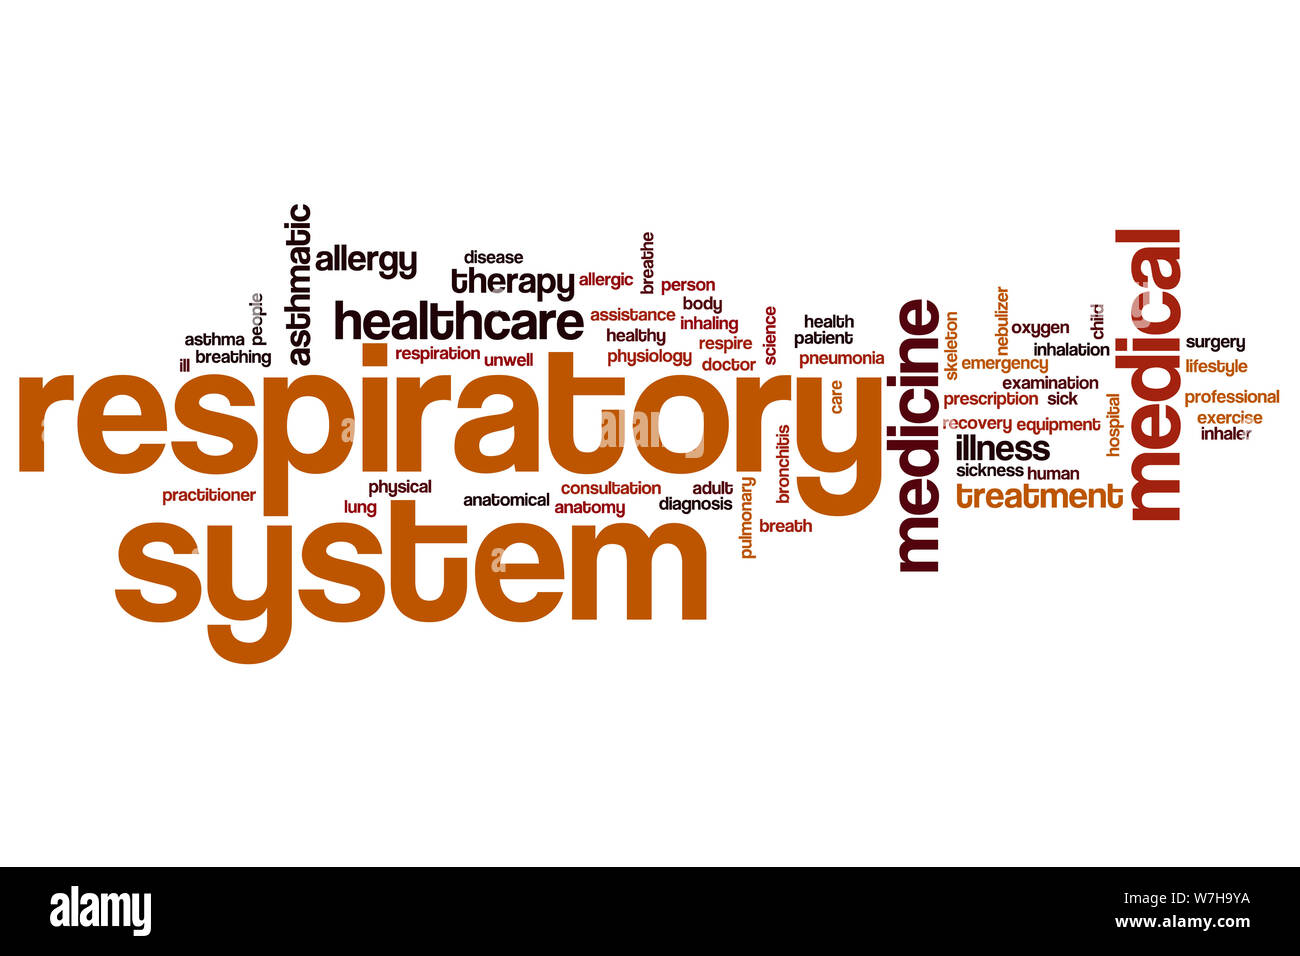 Respiratory system word cloud concept Stock Photo